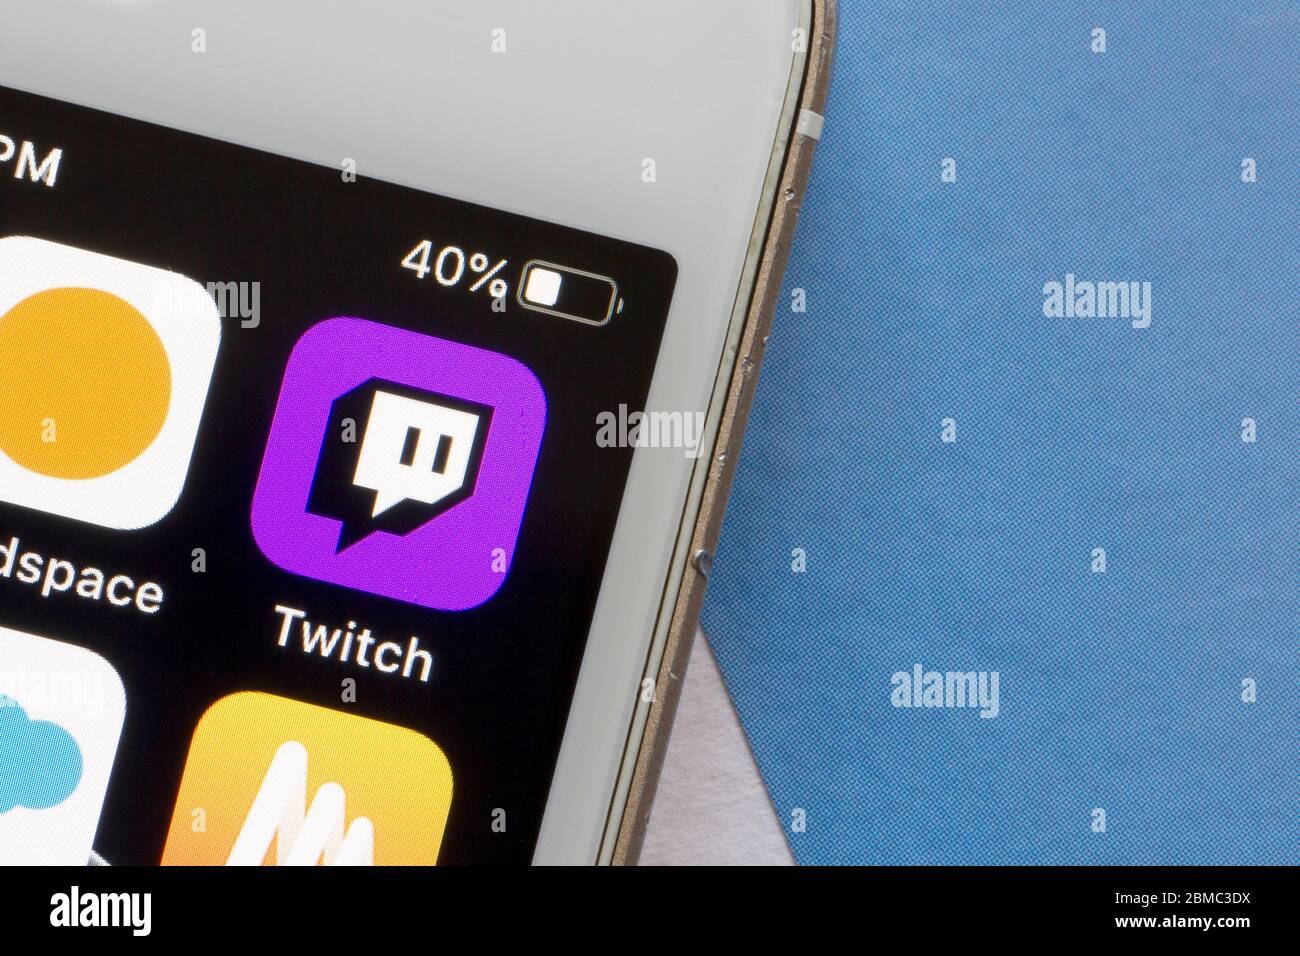 Twitch mobile app icon is seen on a smartphone. Twitch is a video live streaming service operated by Twitch Interactive, a subsidiary of Amazon. Stock Photo